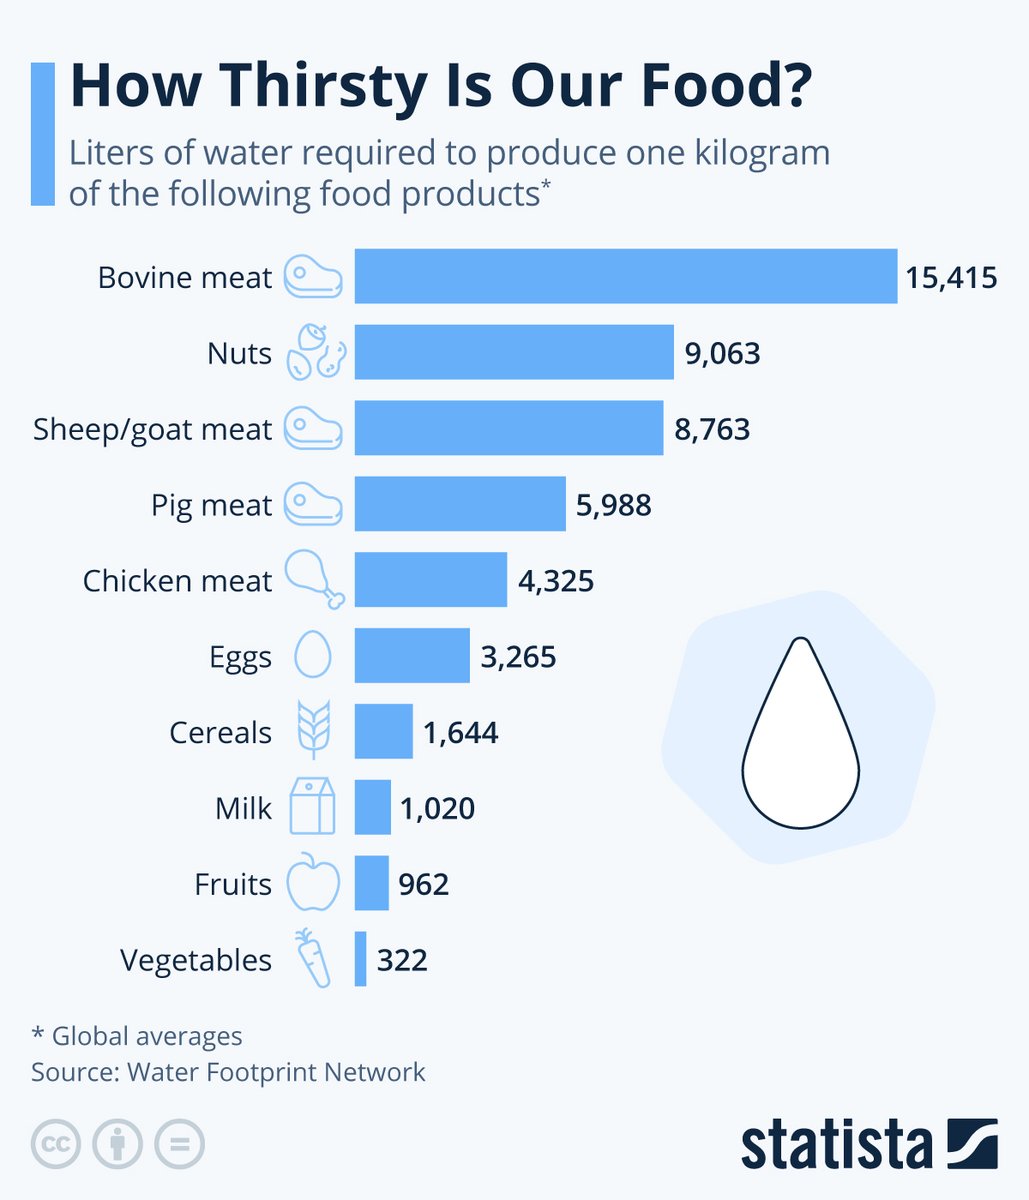 How Thirsty Is Our Food? #Water #Meat #Nuts #egg #Statista